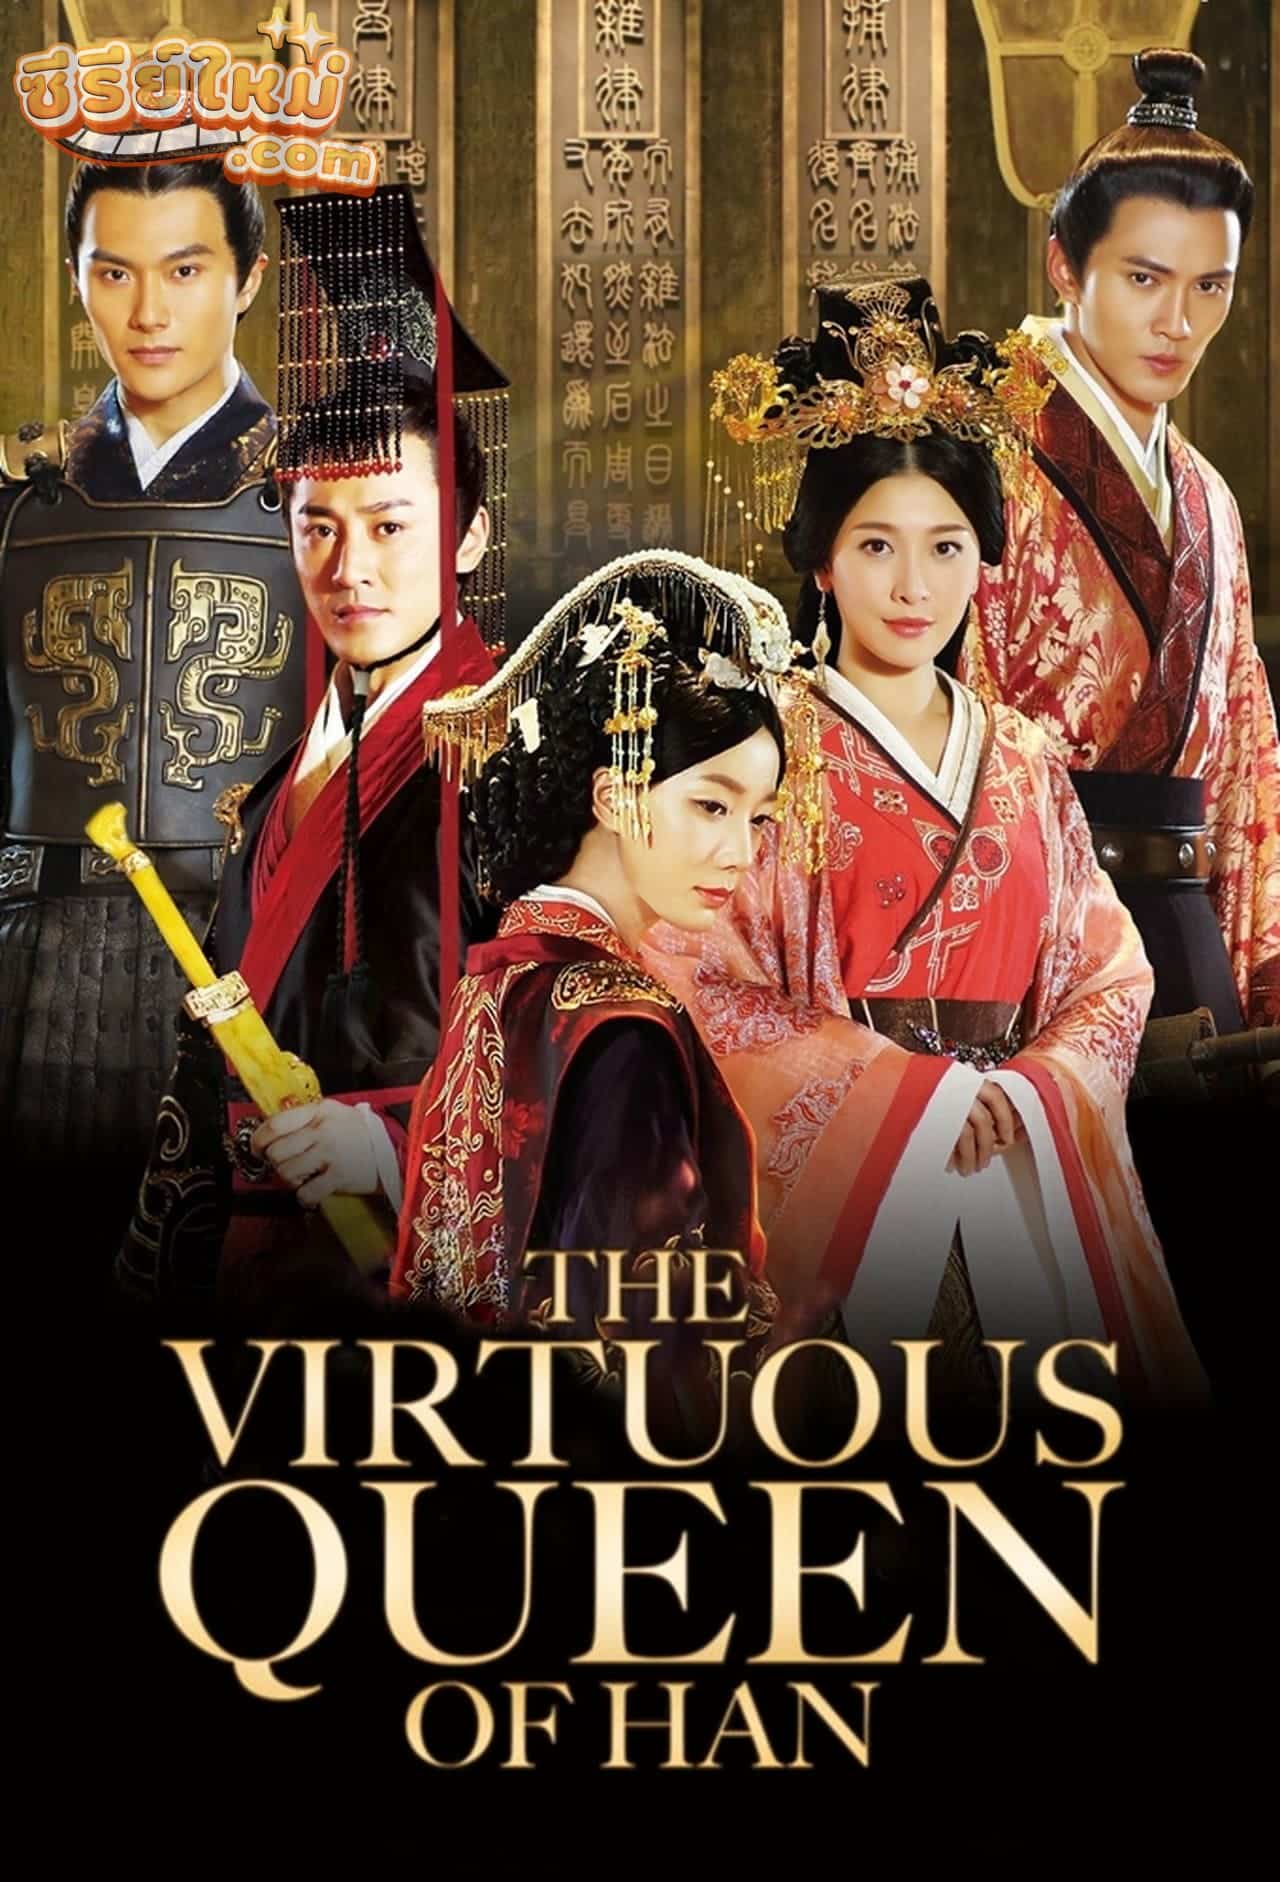 The Virtuous Queen of Han จอมนางบัลลังก์ฮั่น (2014)